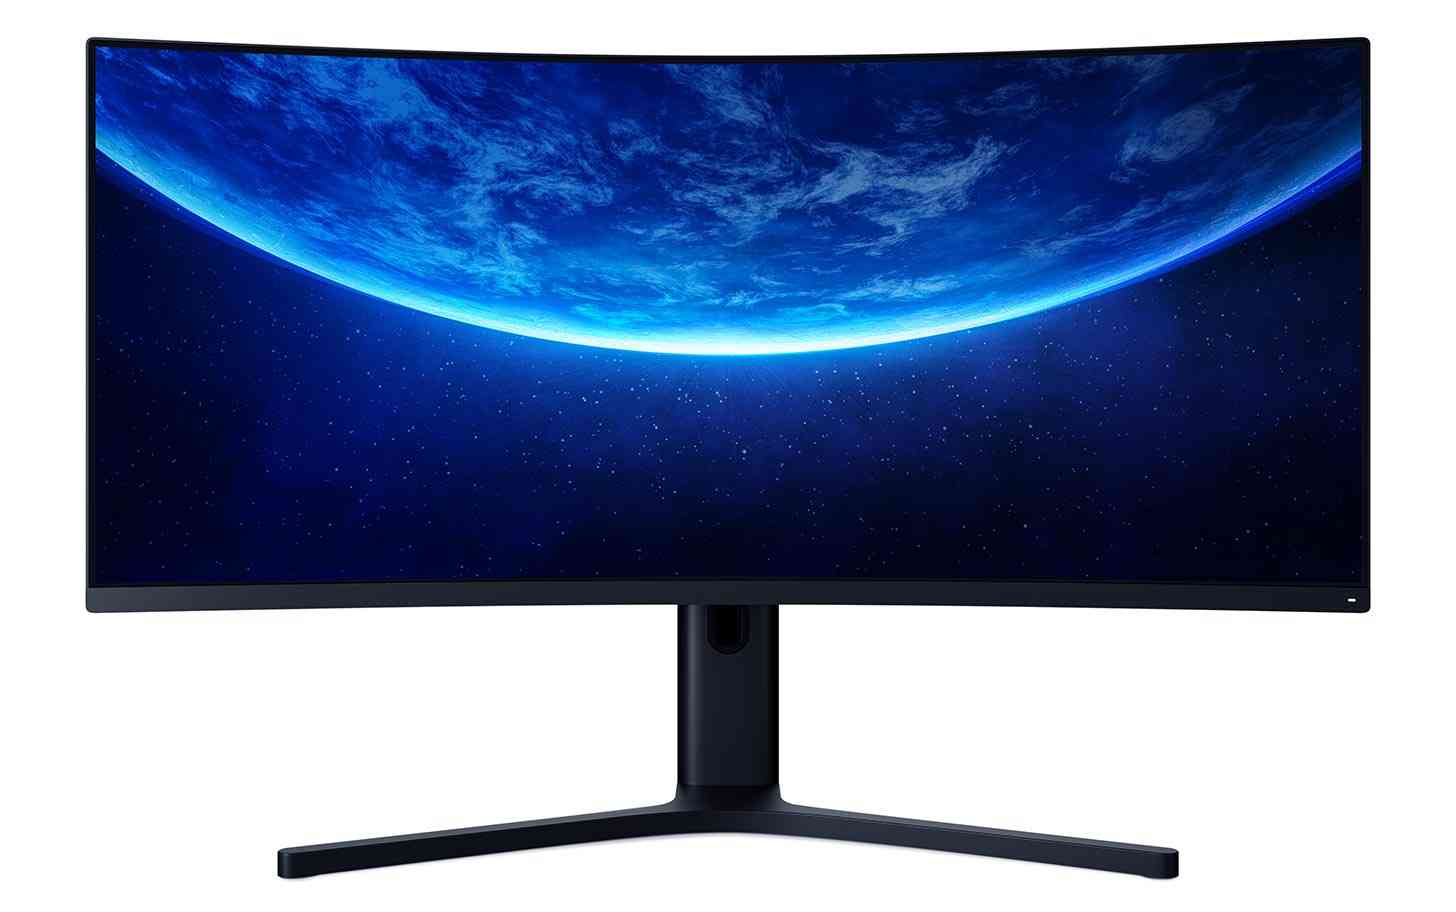 Mi Curved Gaming Monitor 34-inch